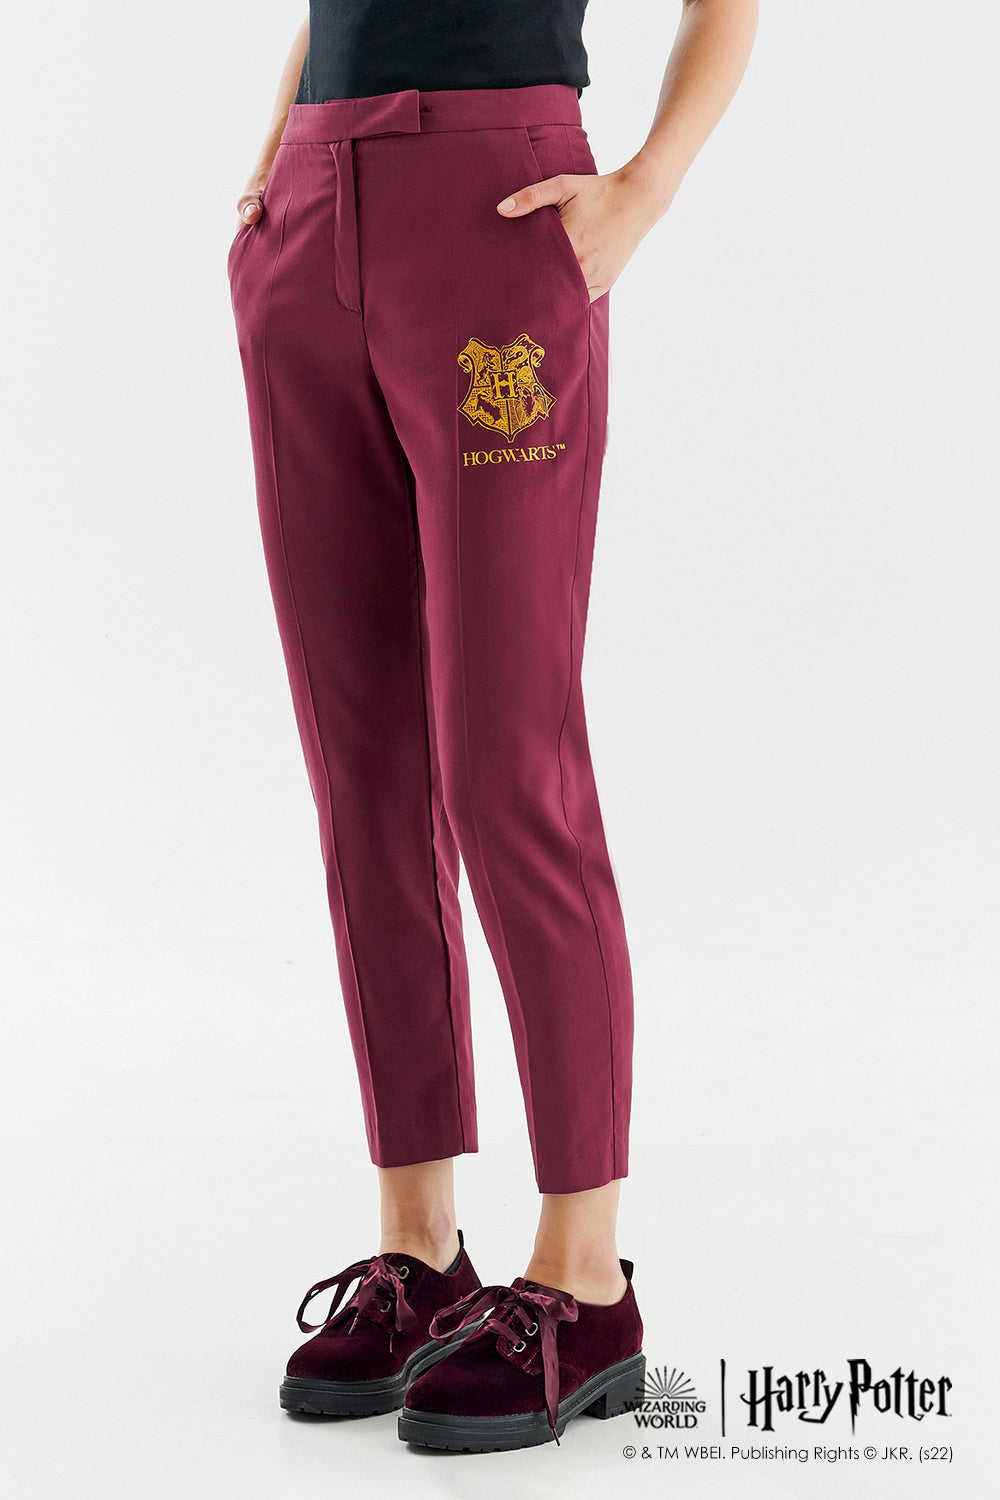 Goblet of Fire pants